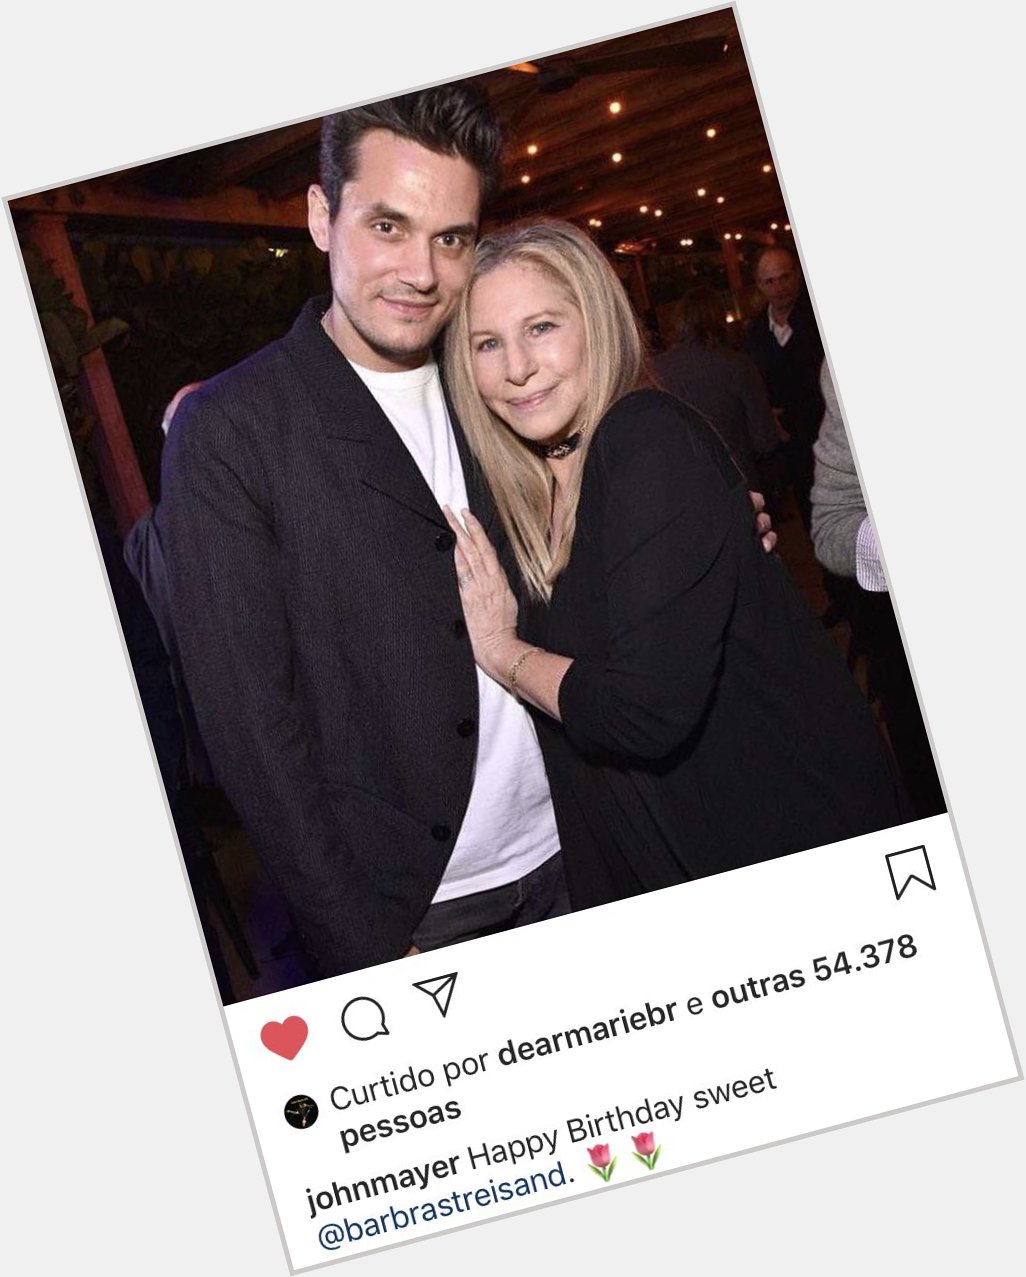 John Clayton Mayer posted this pic to wish Ms. Barbra Streisand a happy birthday and then...     